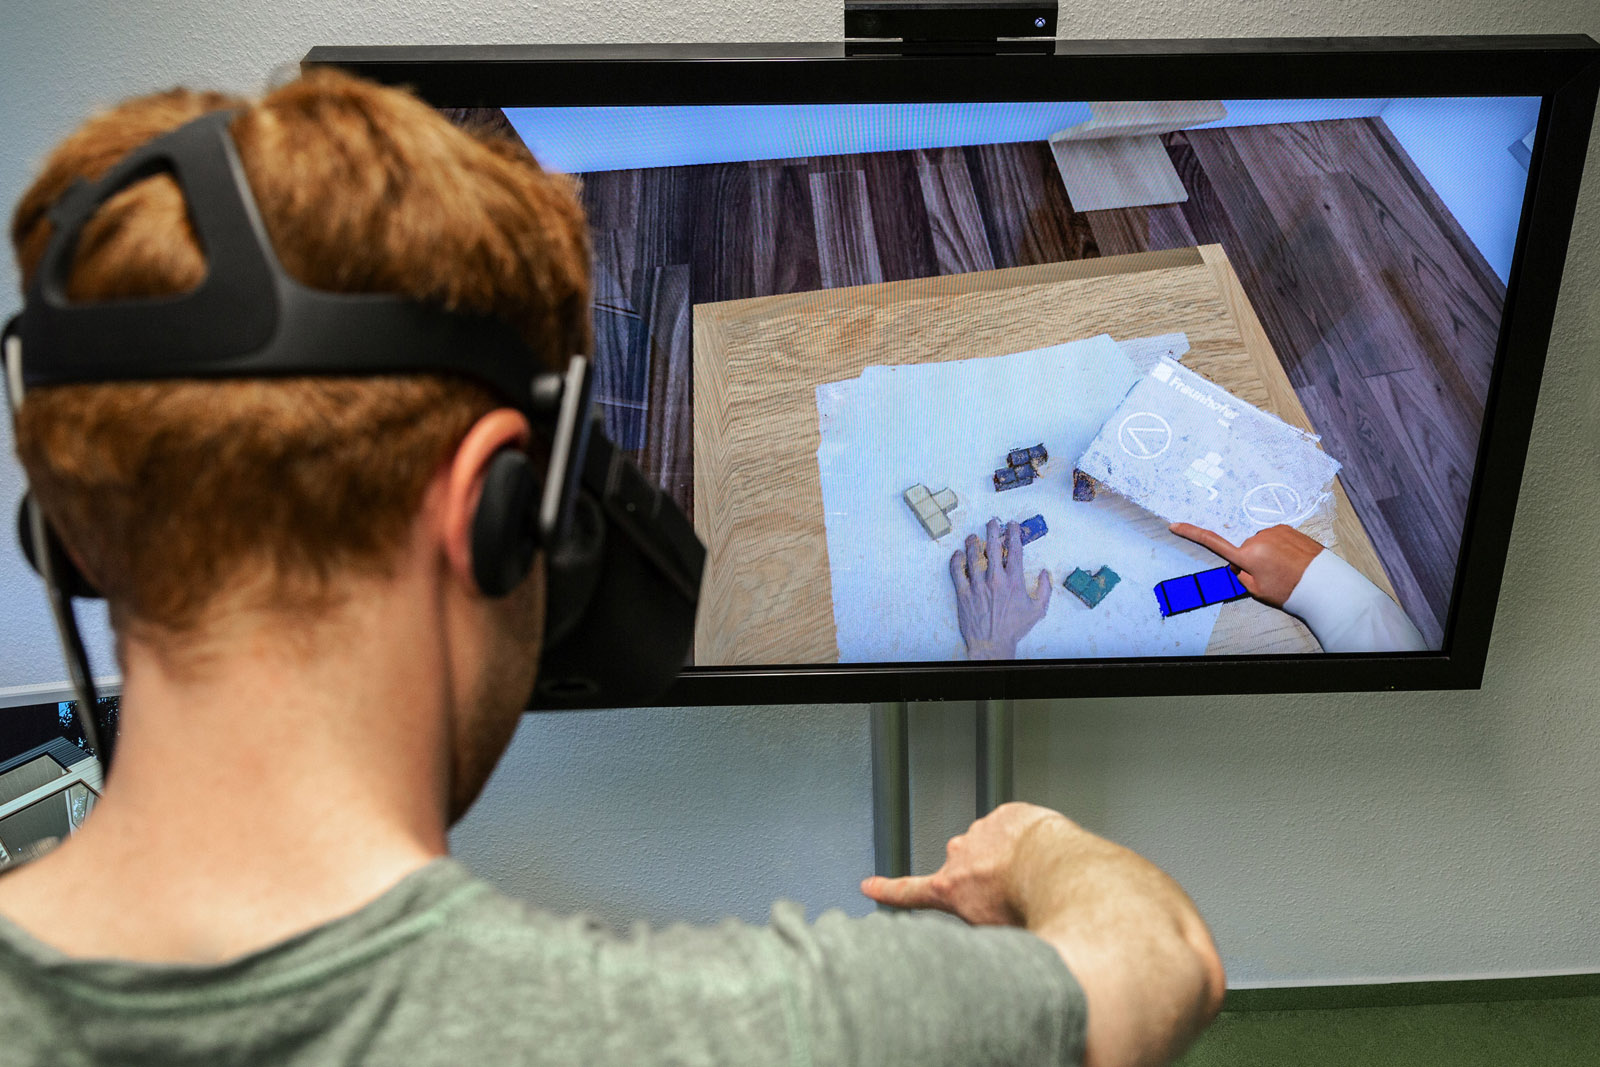 With the mixed reality solution from the Fraunhofer HHI, a simulated world can be combined with the real world in real time and with high quality. 